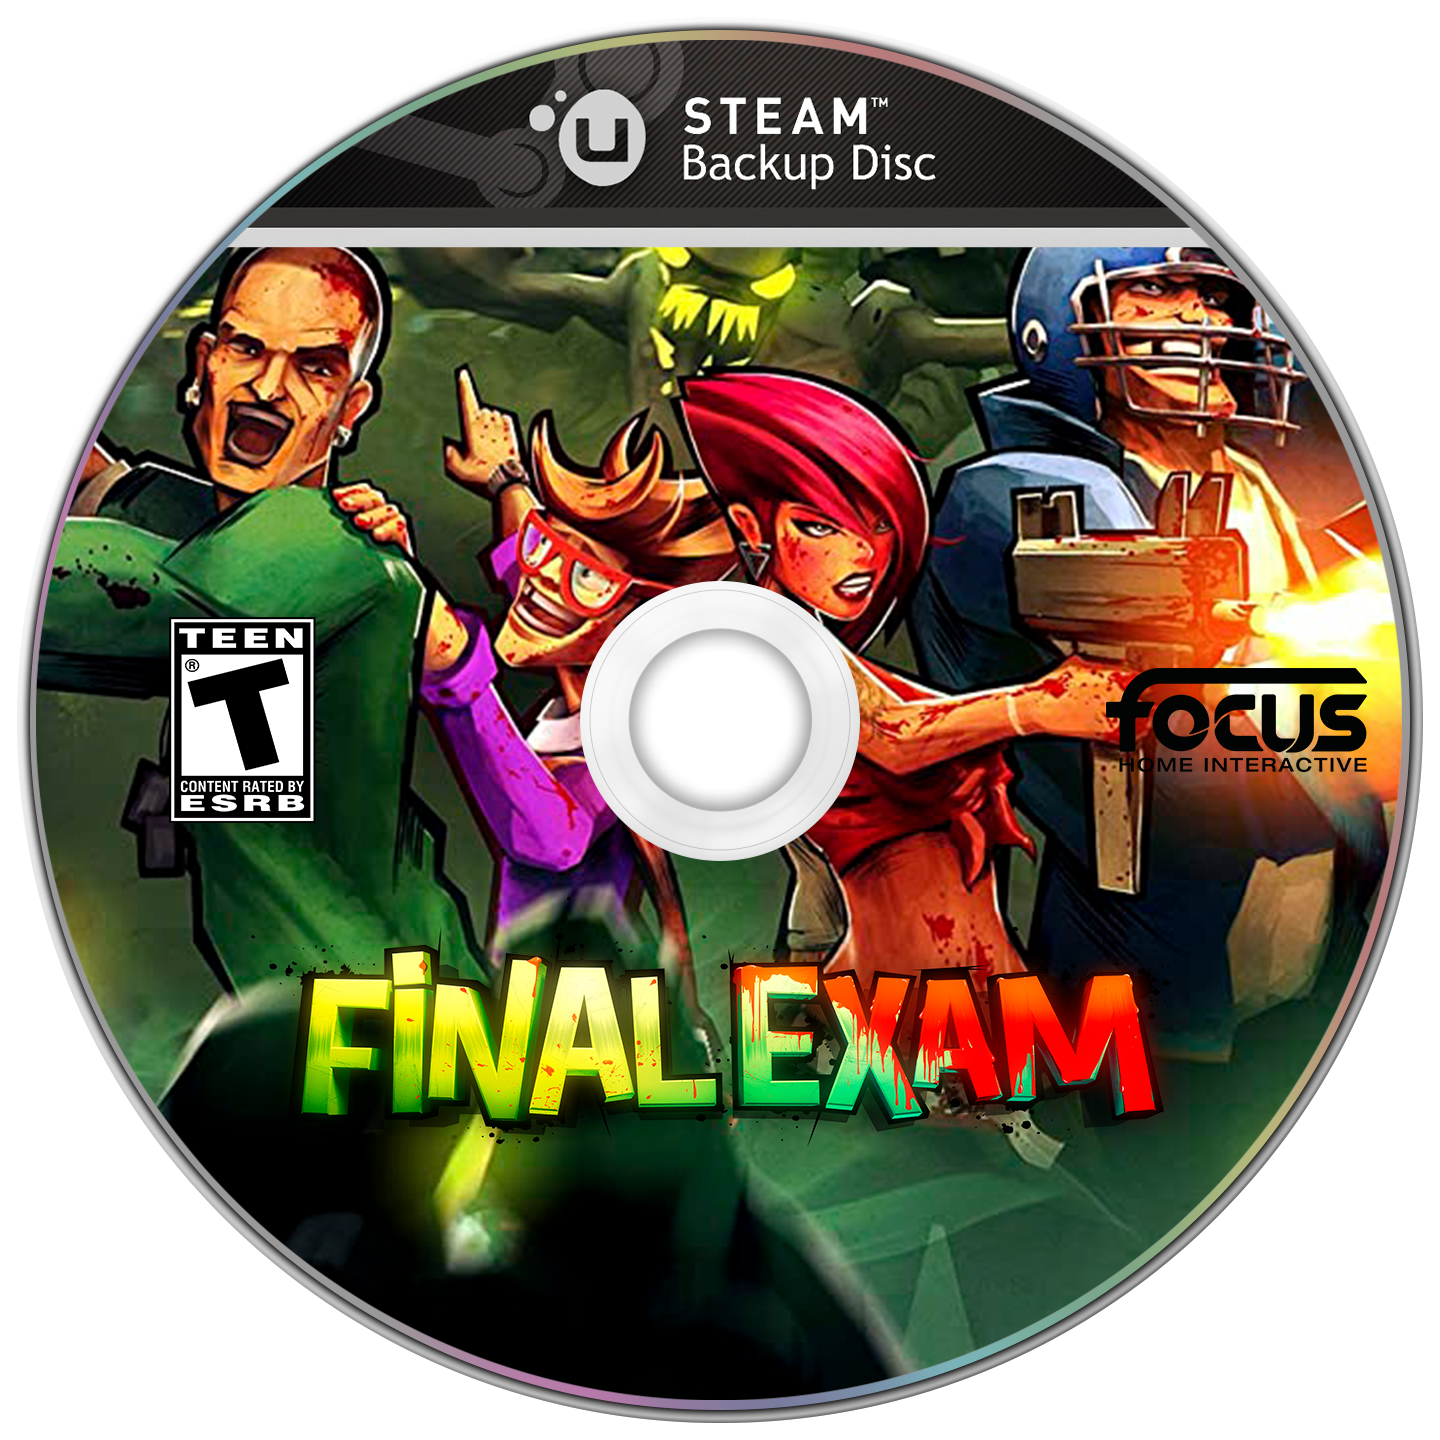 final exam game cover